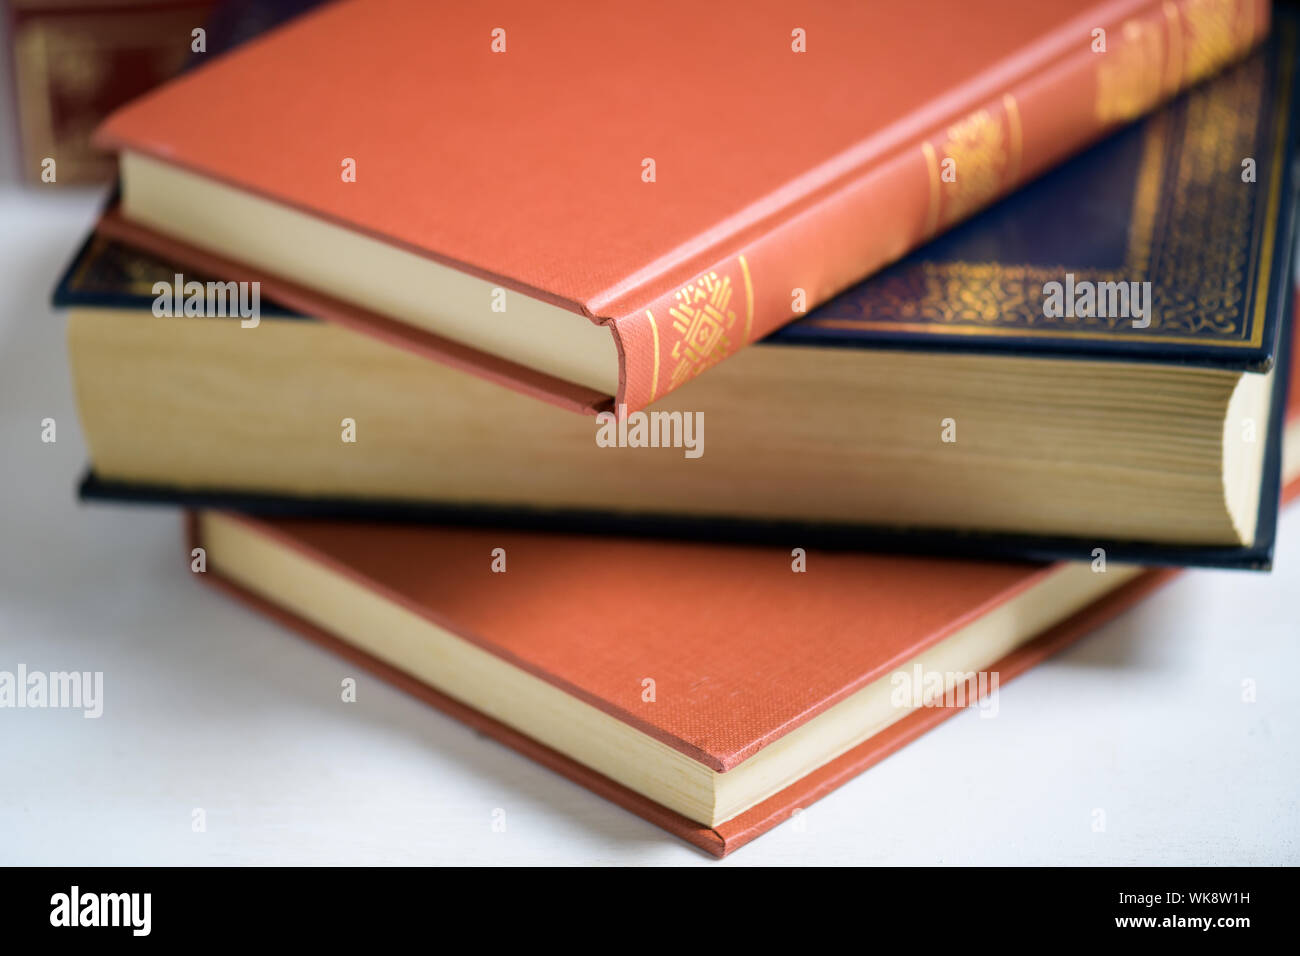 A stack of books on the white background, seletive focus, Education and wisdom concept Stock Photo